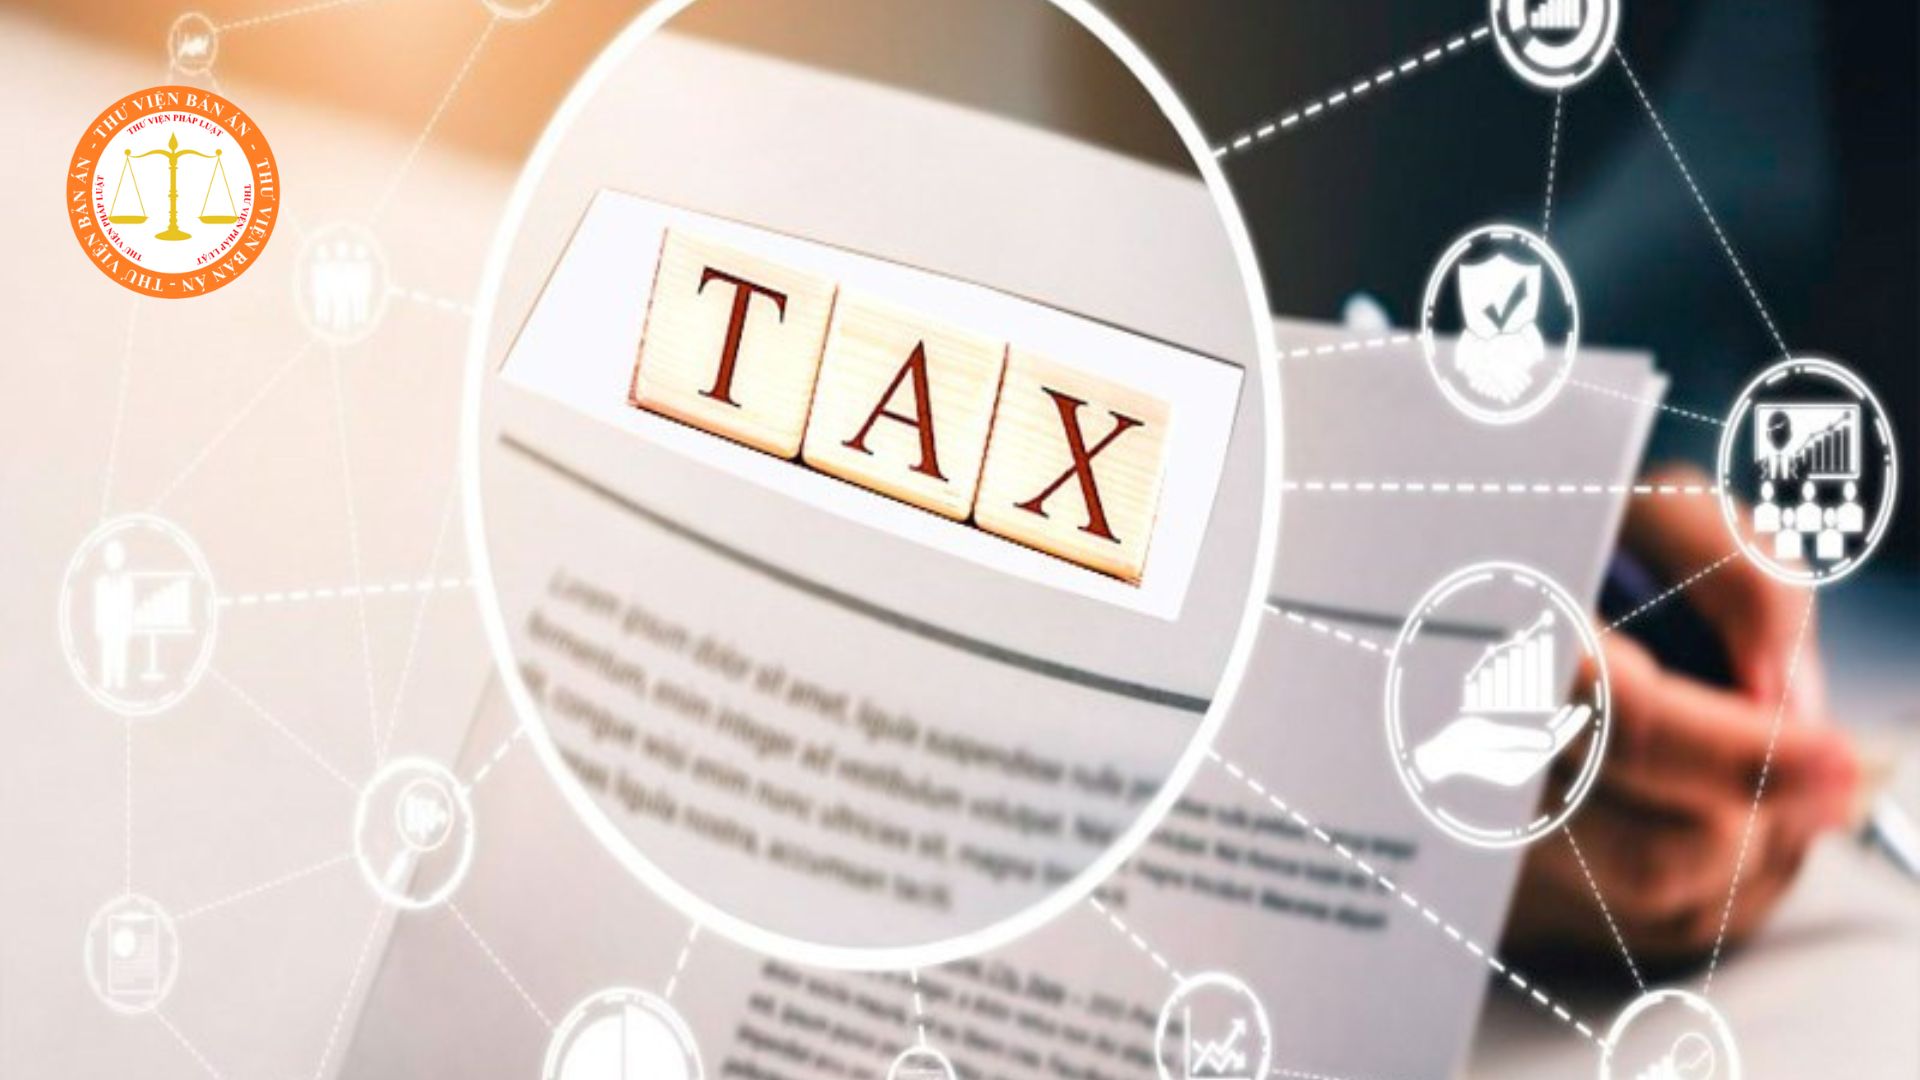 What are the cases where organization or individual shall declare and pay tax on behalf of another individual in Vietnam?